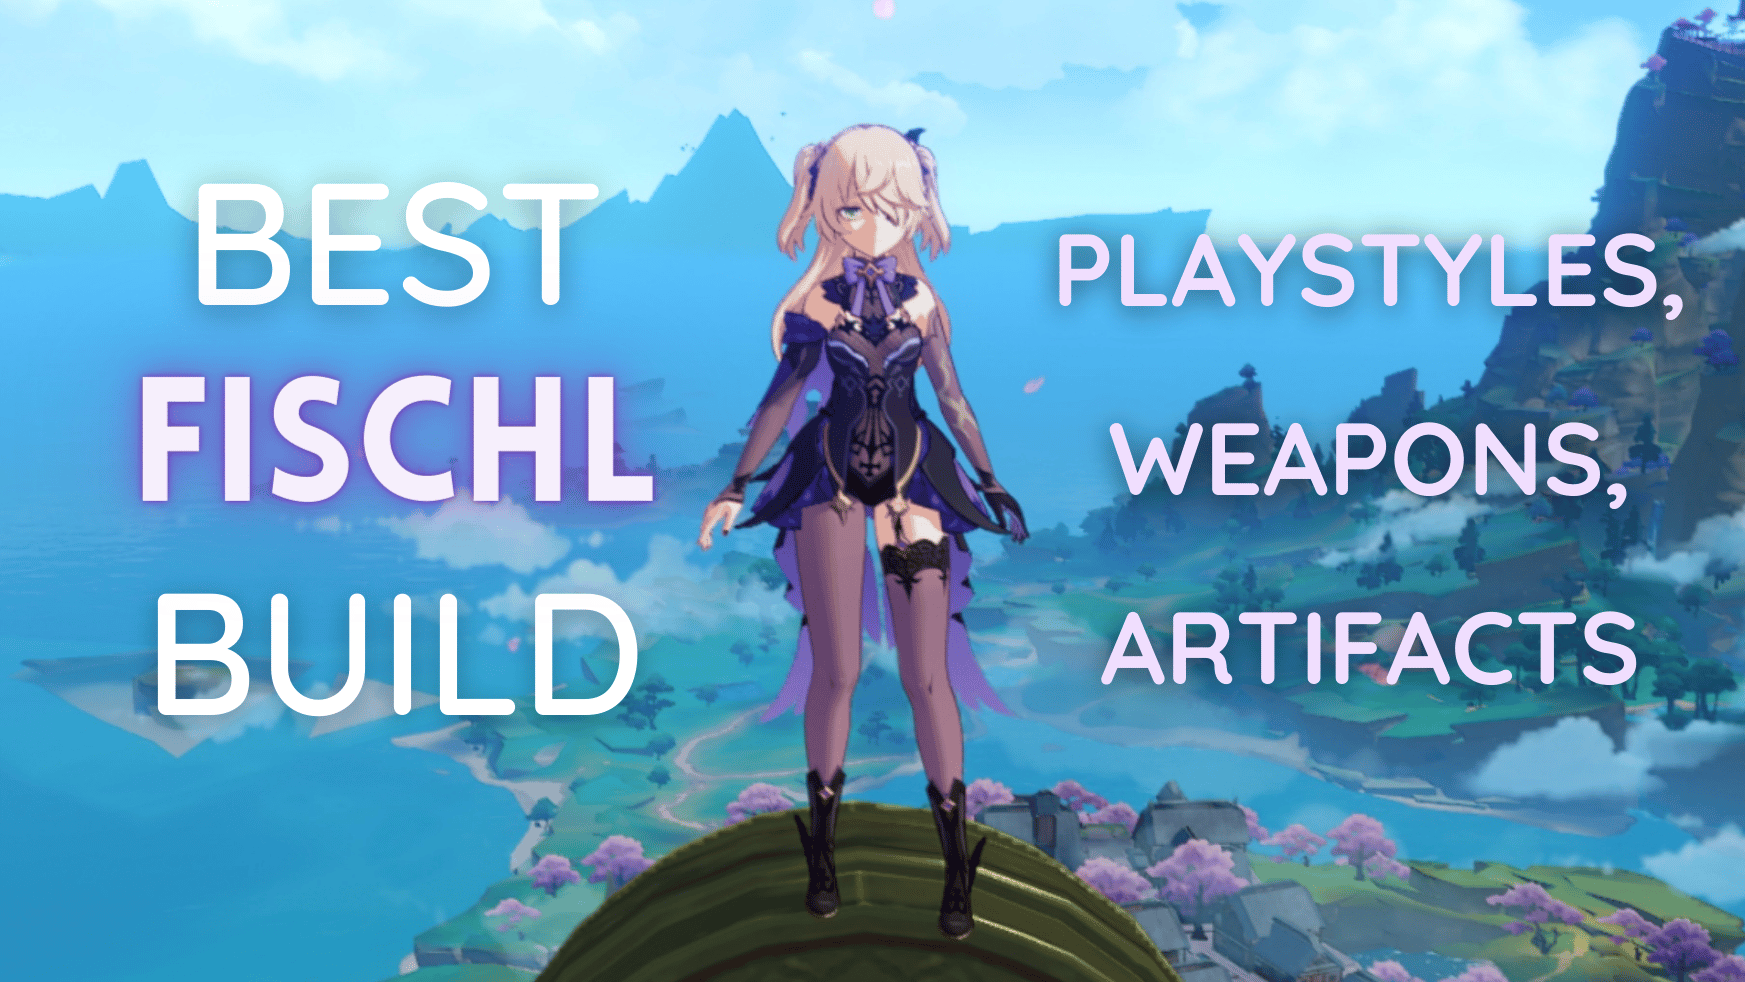 Best Fischl Build: Playstyles. Weapons, Artifacts